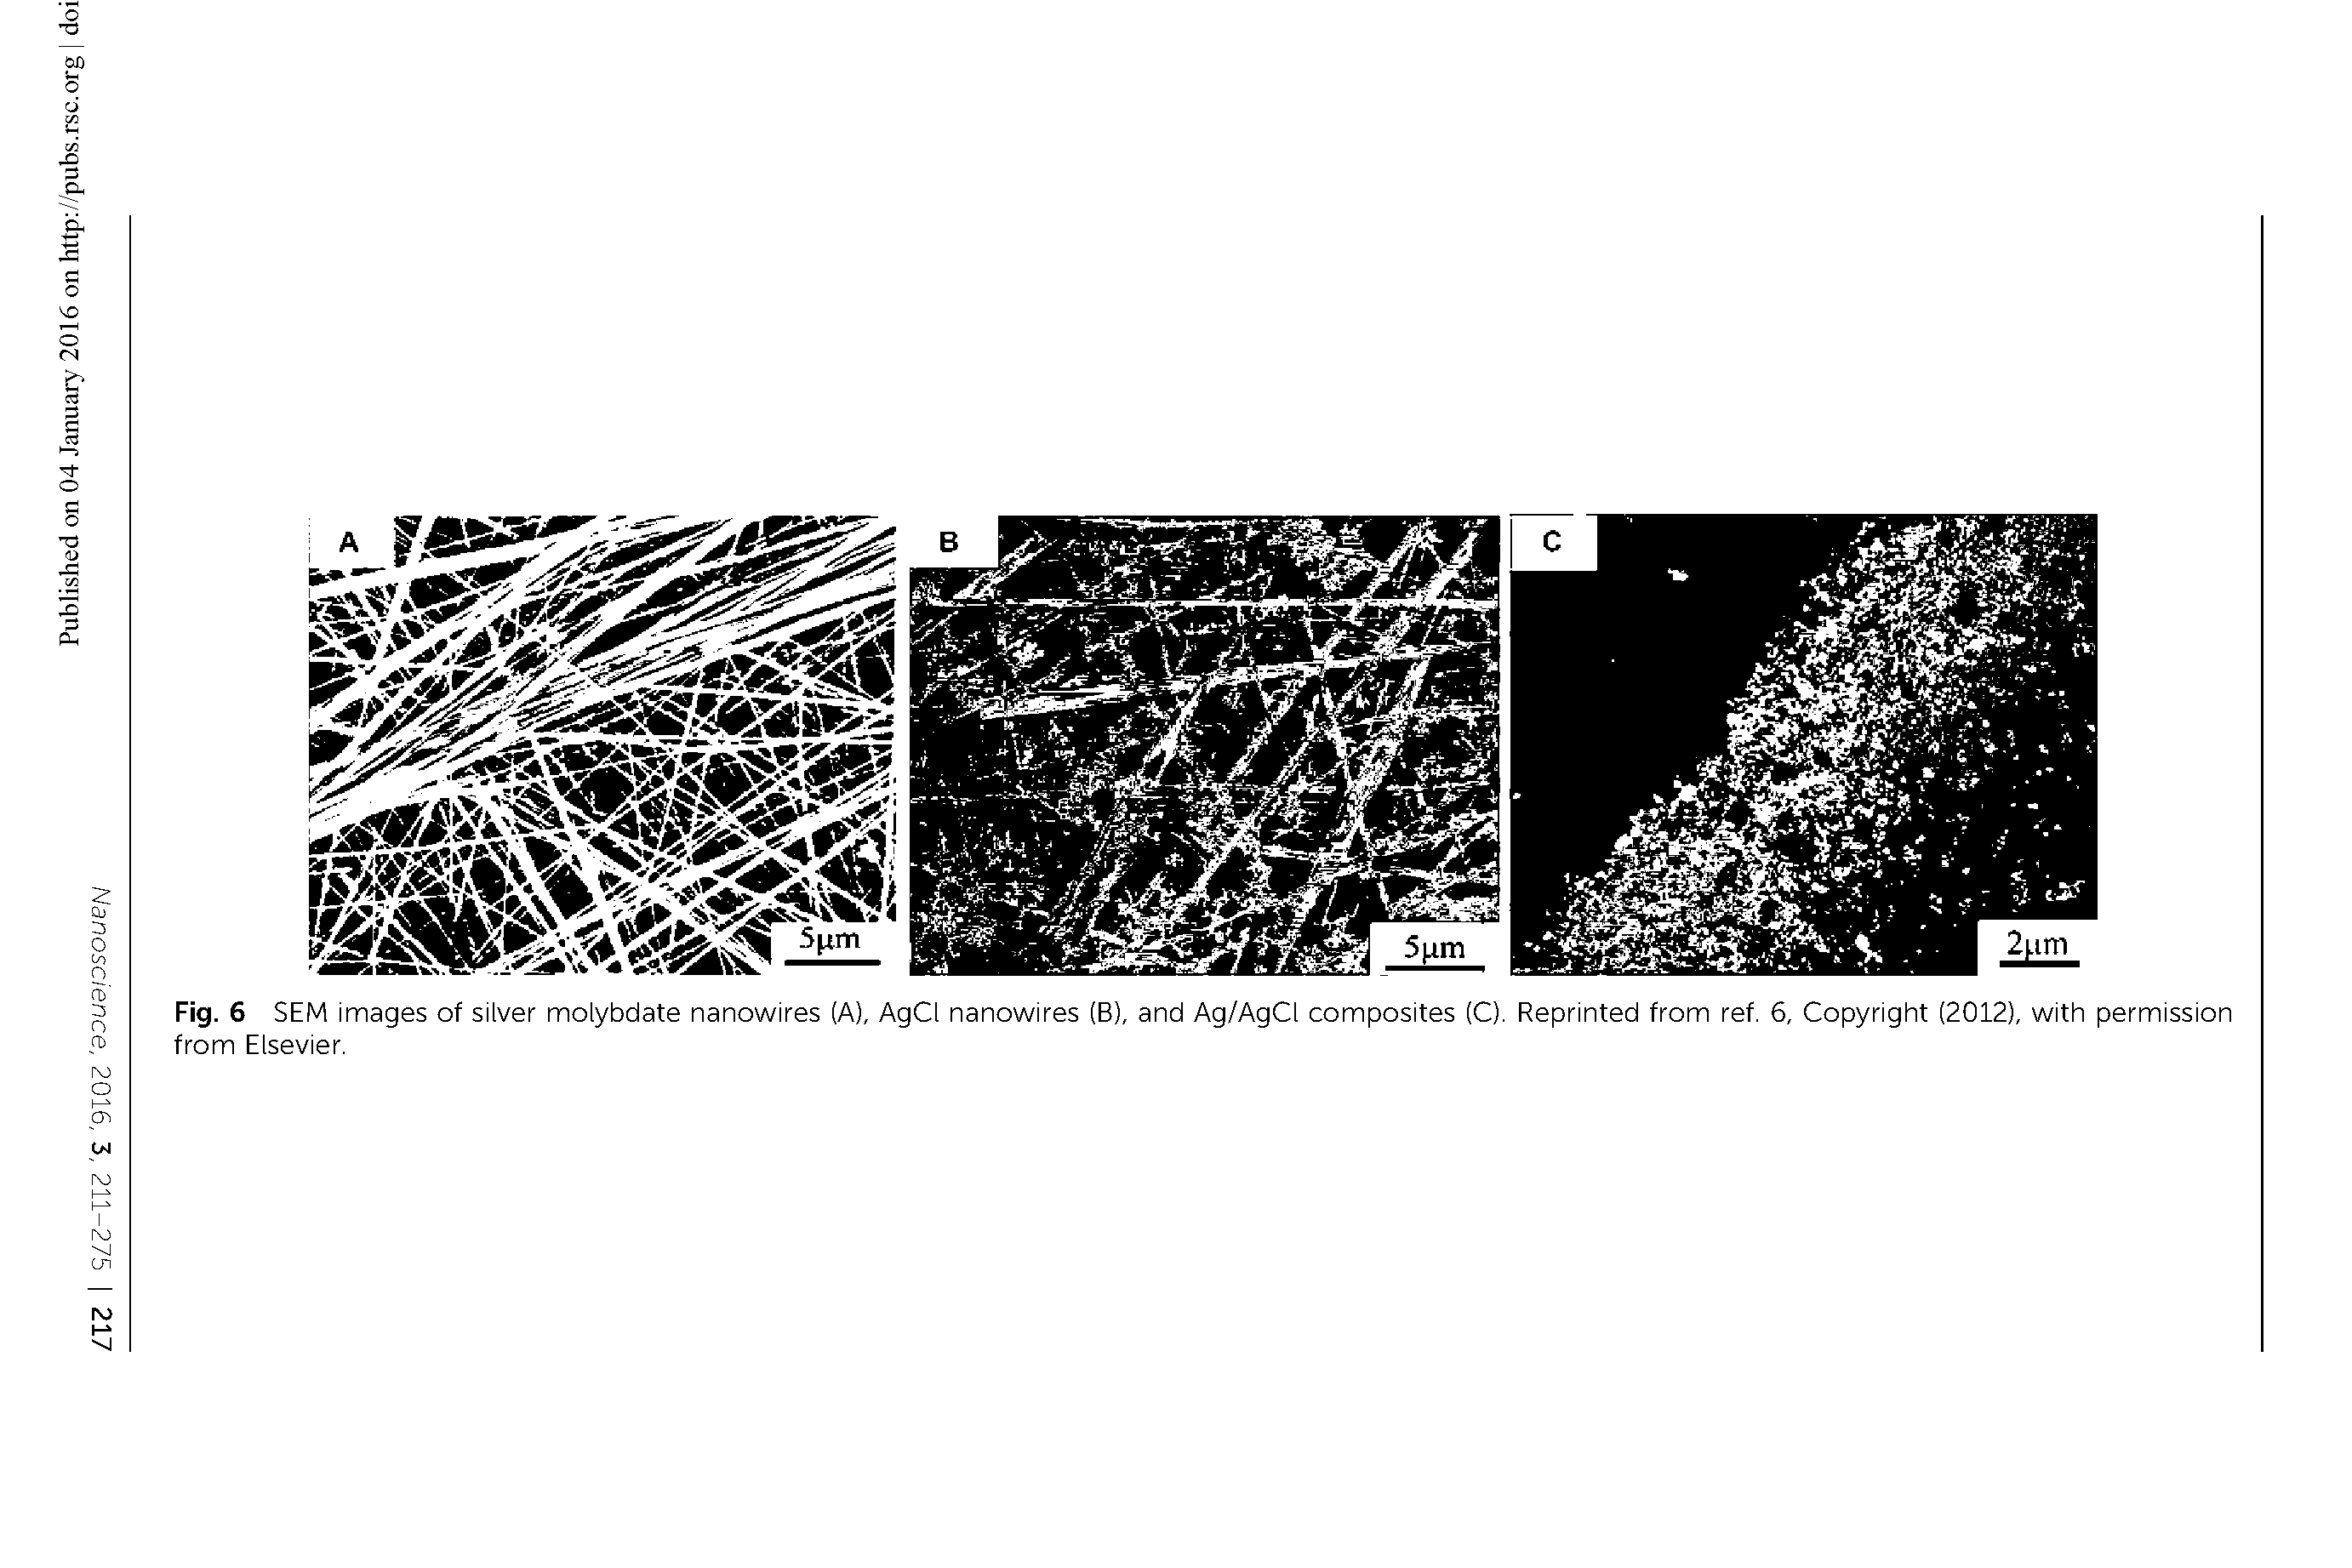 Fig. 6 SEM images of silver molybdate nanowires (A), AgCl nanowires (B), and Ag/AgCl composites (C). Reprinted from ref. 6, Copyright (2012), with permission from Elsevier.